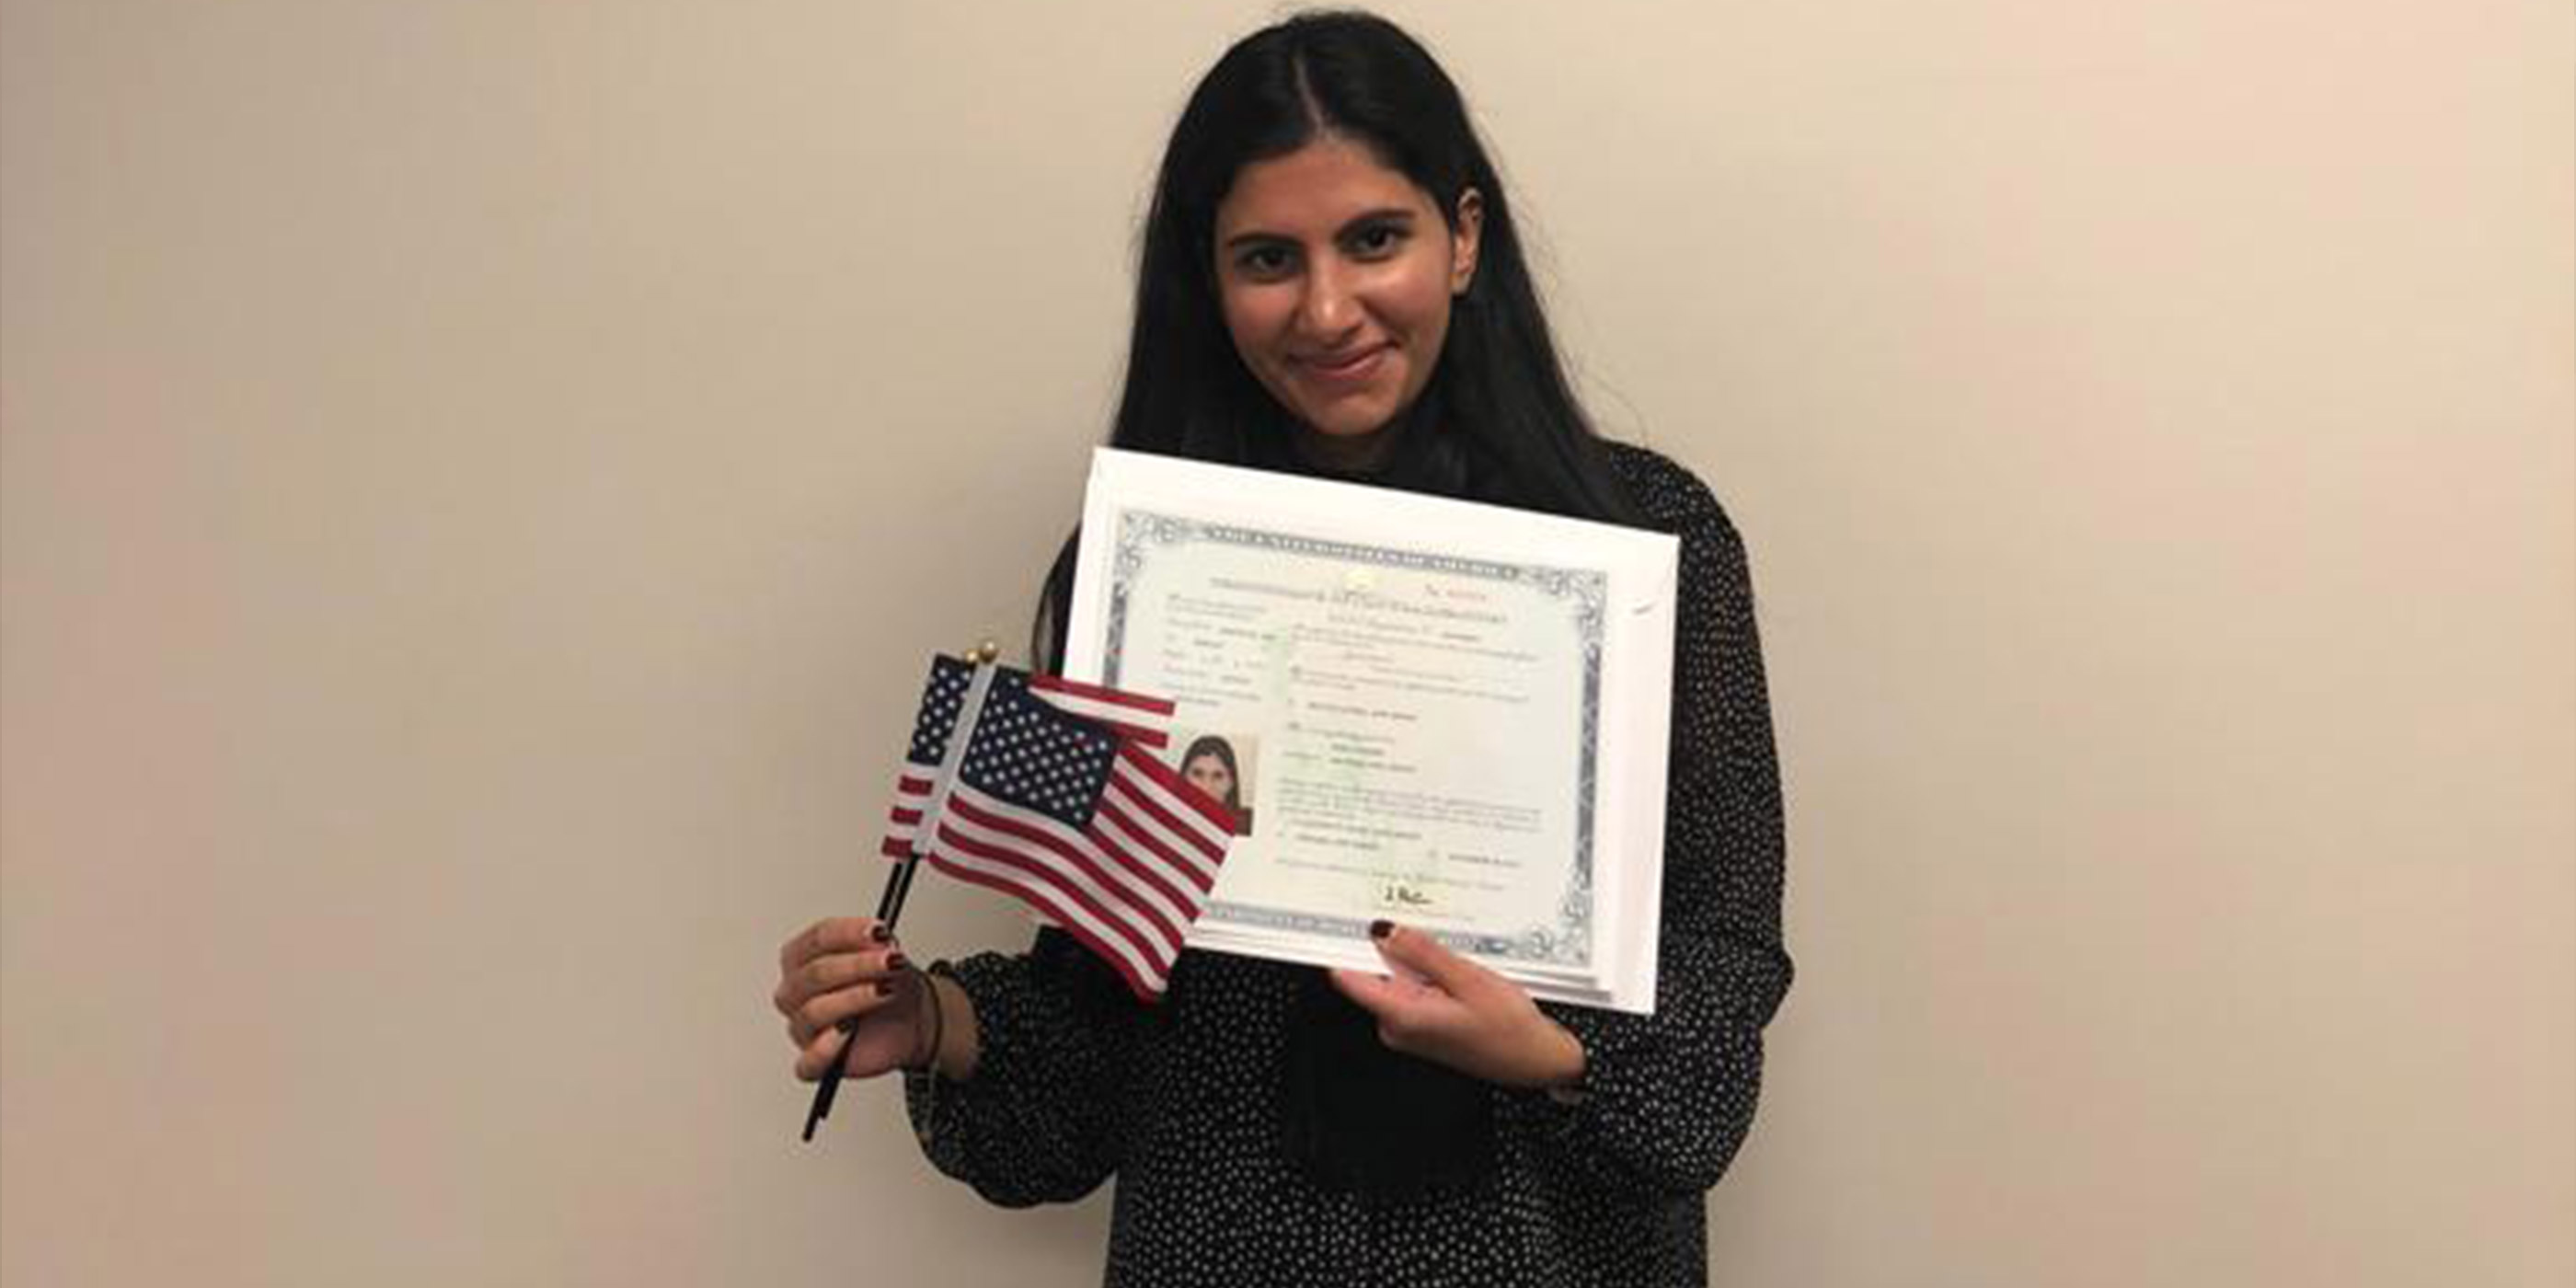 Mira Naseer, a diversity visa recipient, holding her naturalization papers and two American flags.